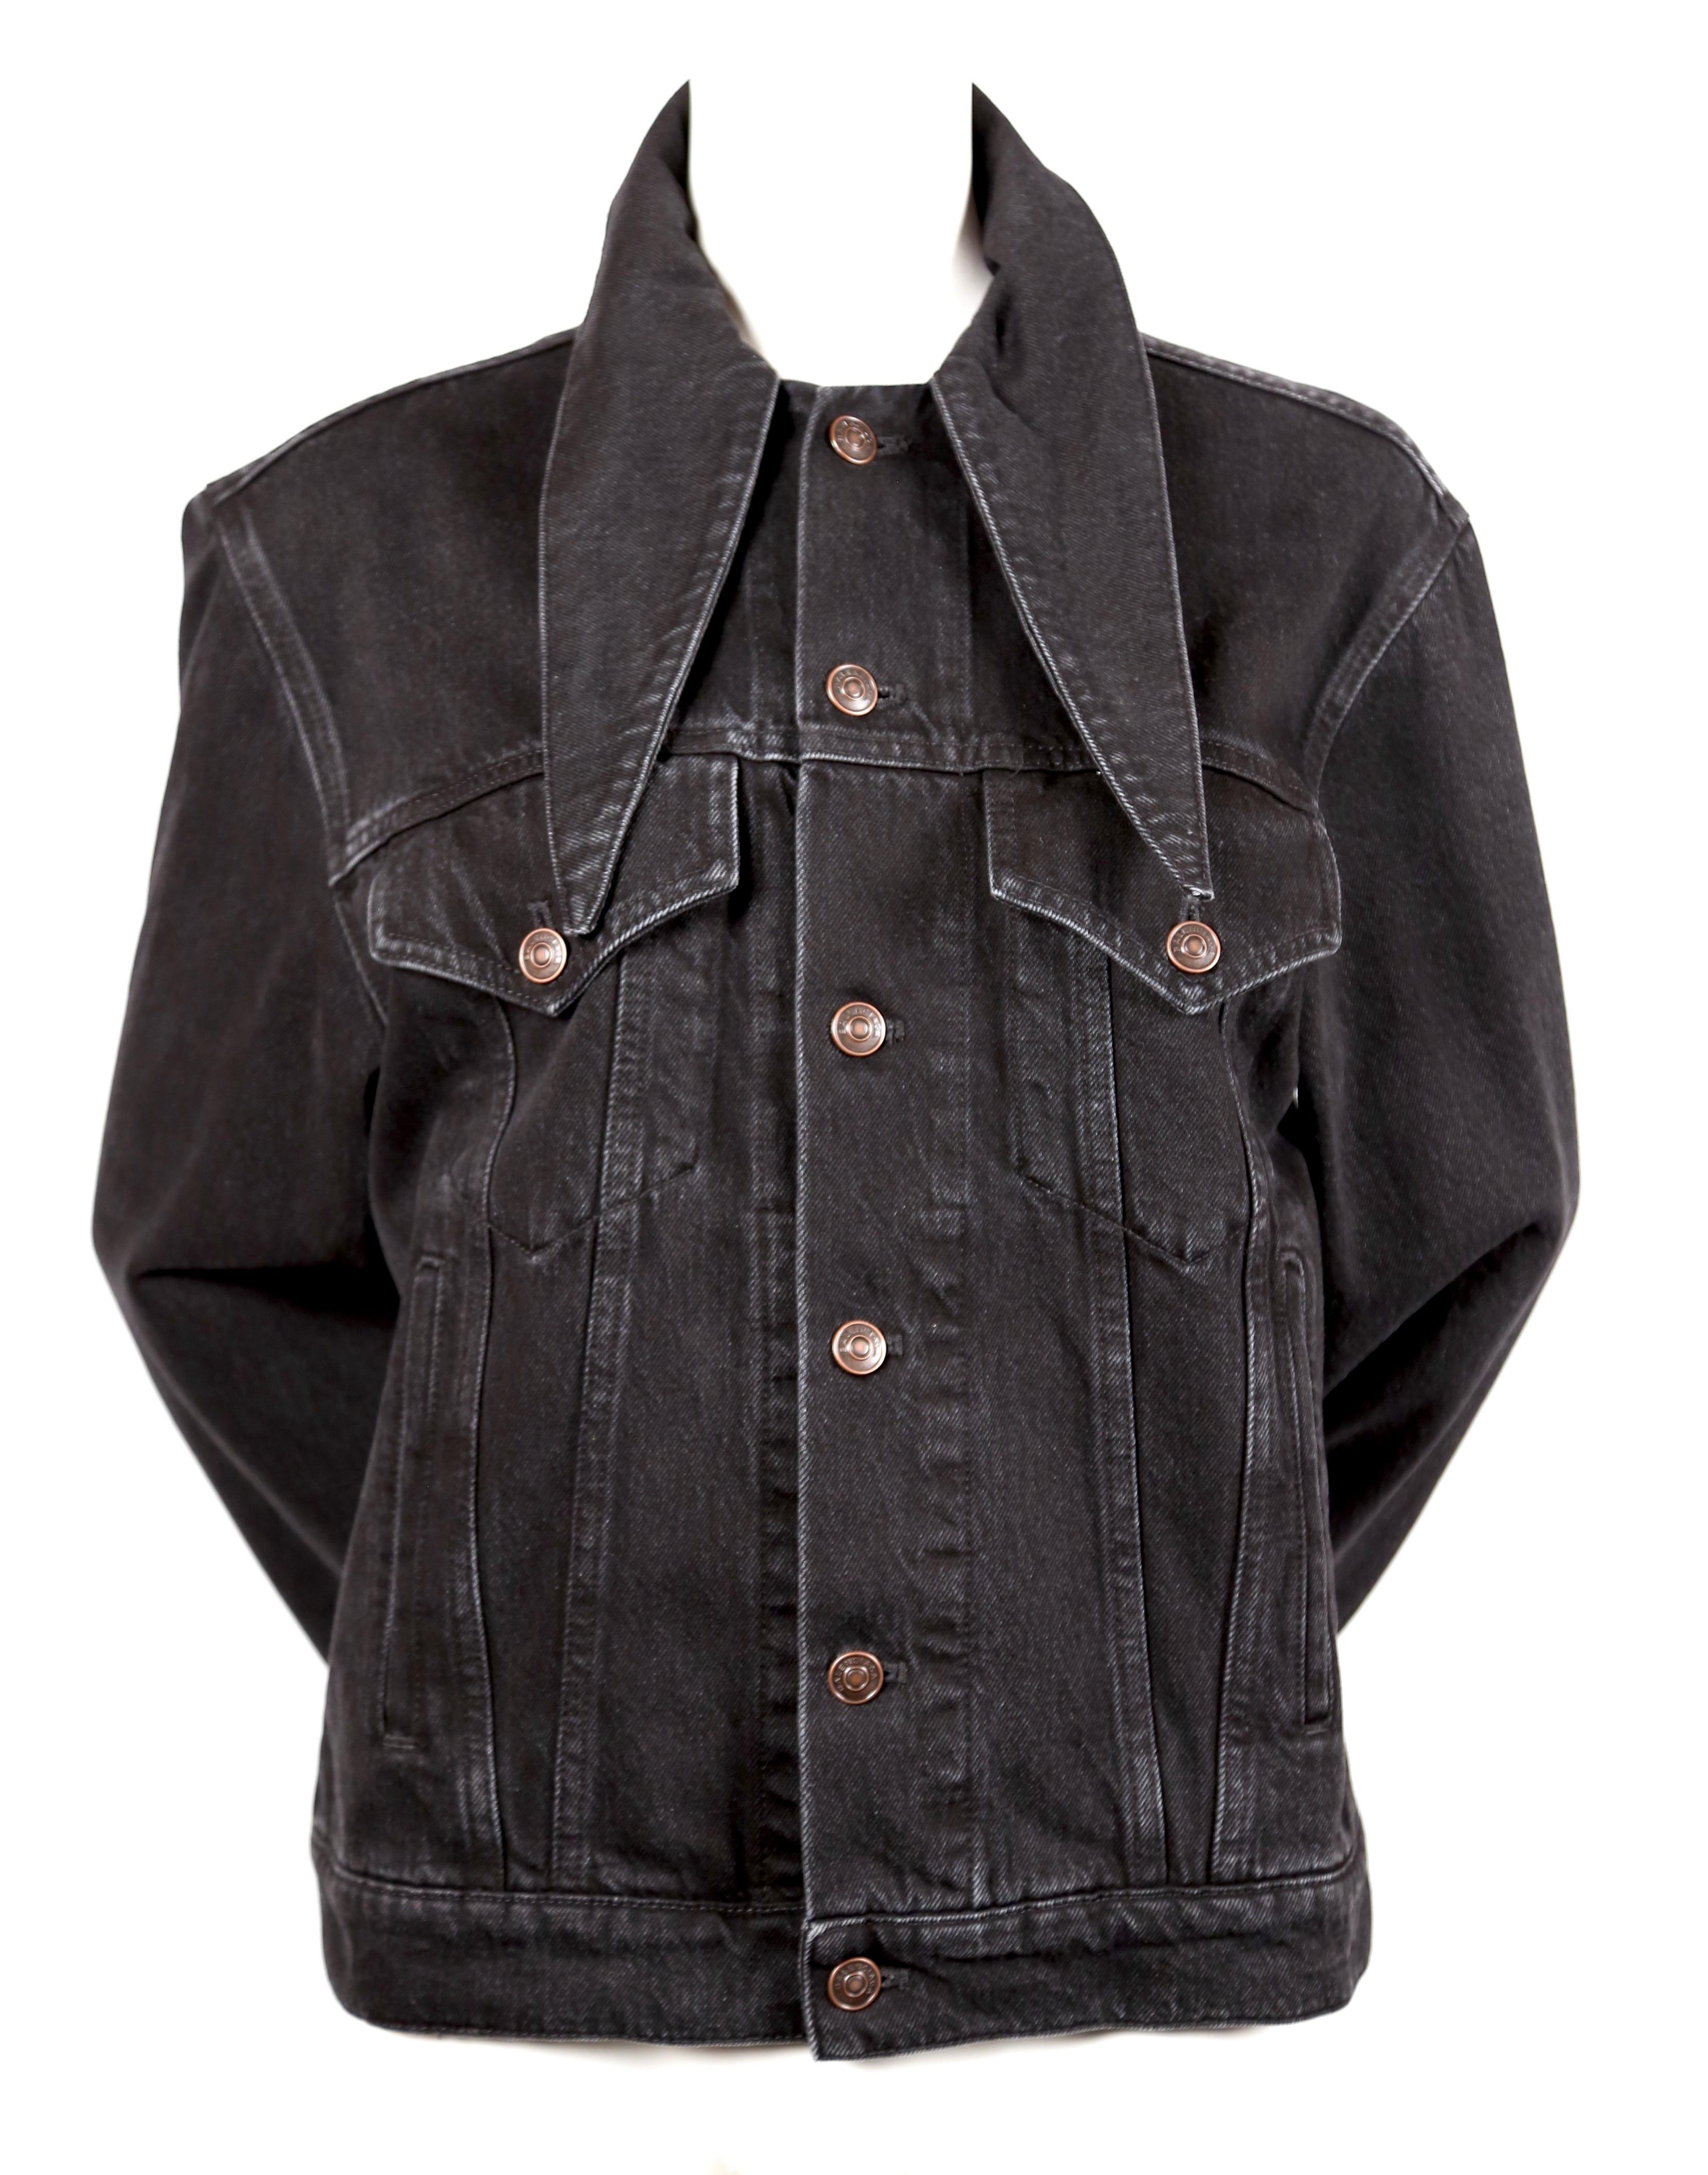 Long sleeve denim jacket in 'simple stonewash' black with scarf tie at collar designed by Demna Gvasalia for Balenciaga. French size 38. Approximate measurements: 18